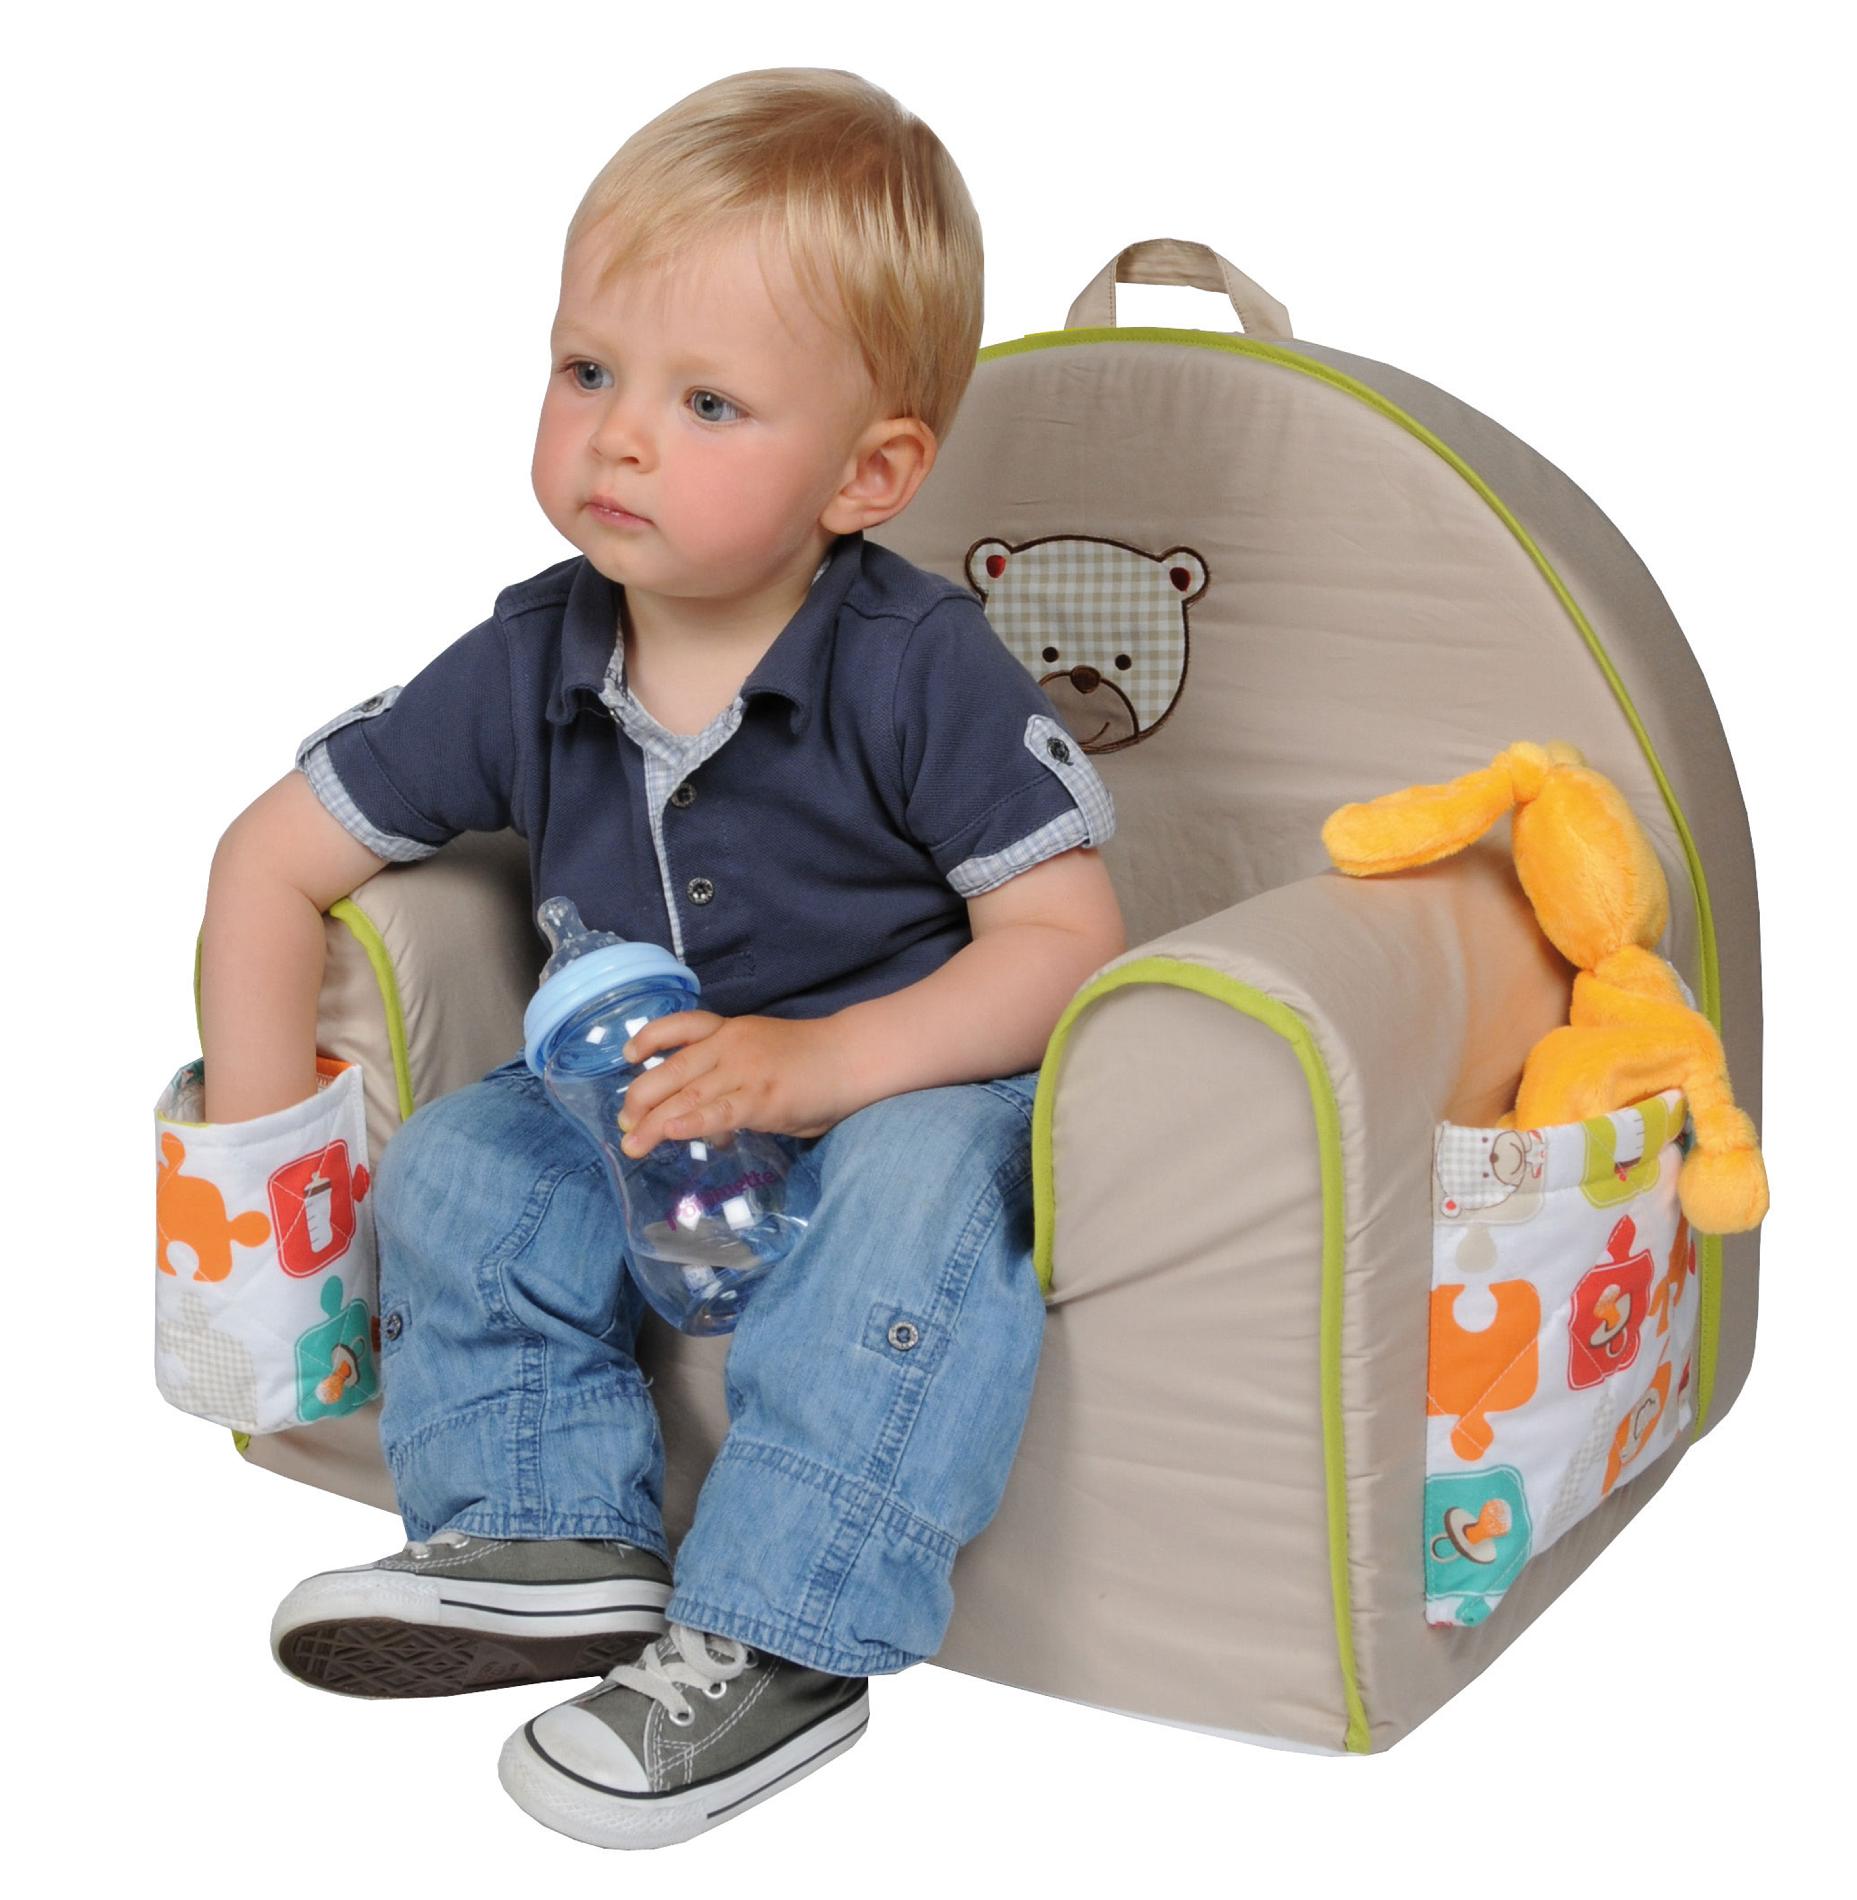 Tineo by Candide Baby Group Toddler Padded Armchair 